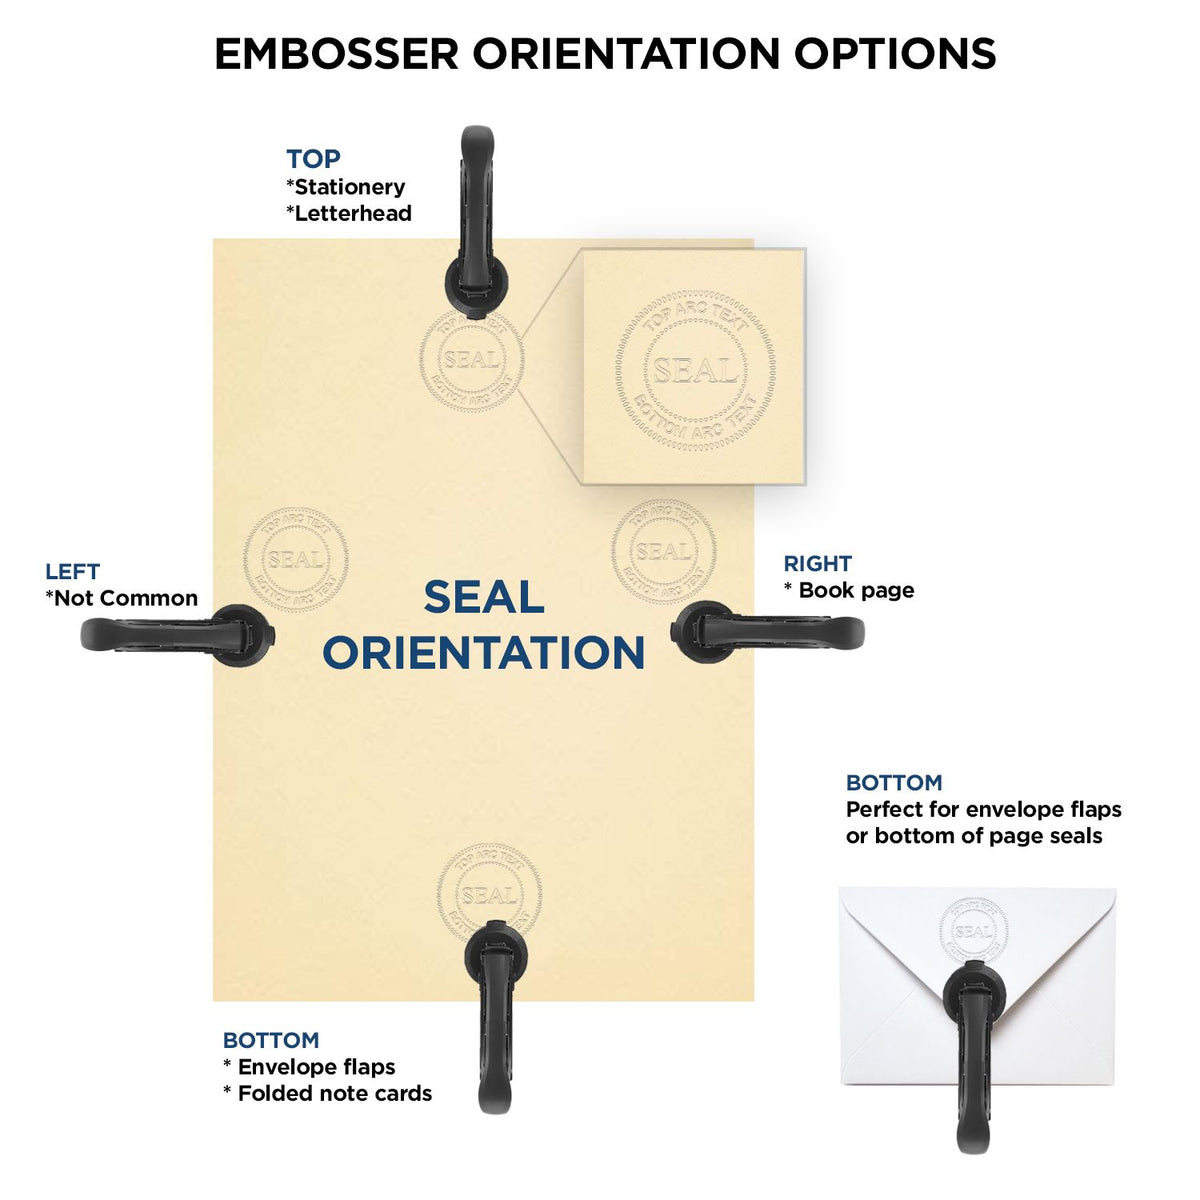 An infographic for the Michigan Geologist Desk Seal showing embosser orientation, this is showing examples of a top, bottom, right and left insert.